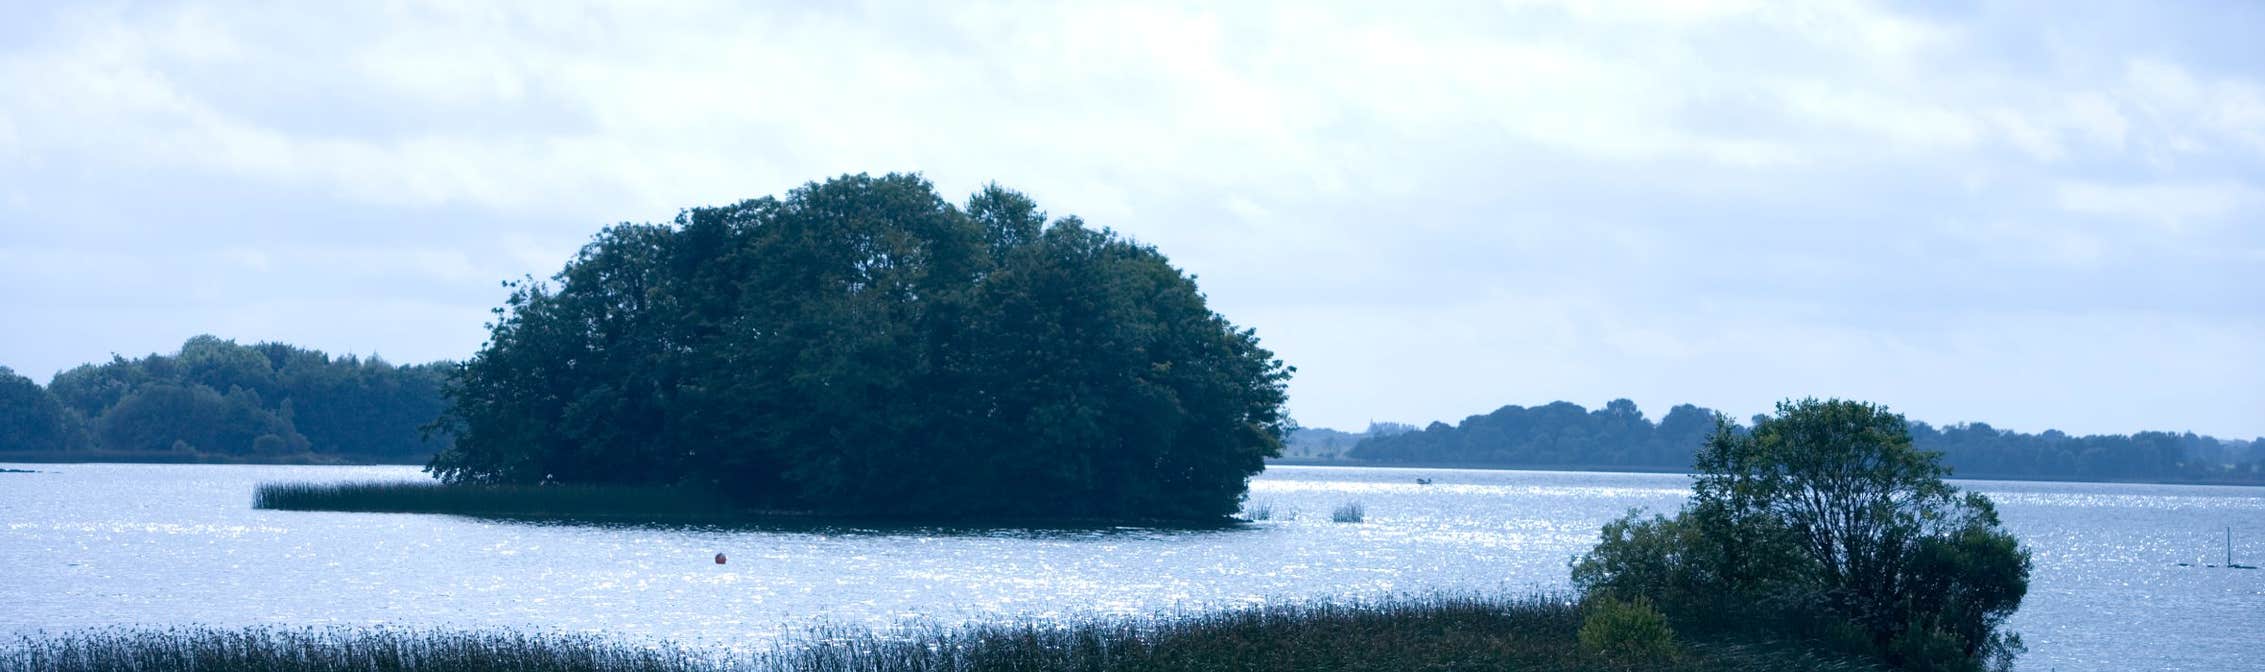 Image of Lough Ennell in Mullingar in County Westmeath